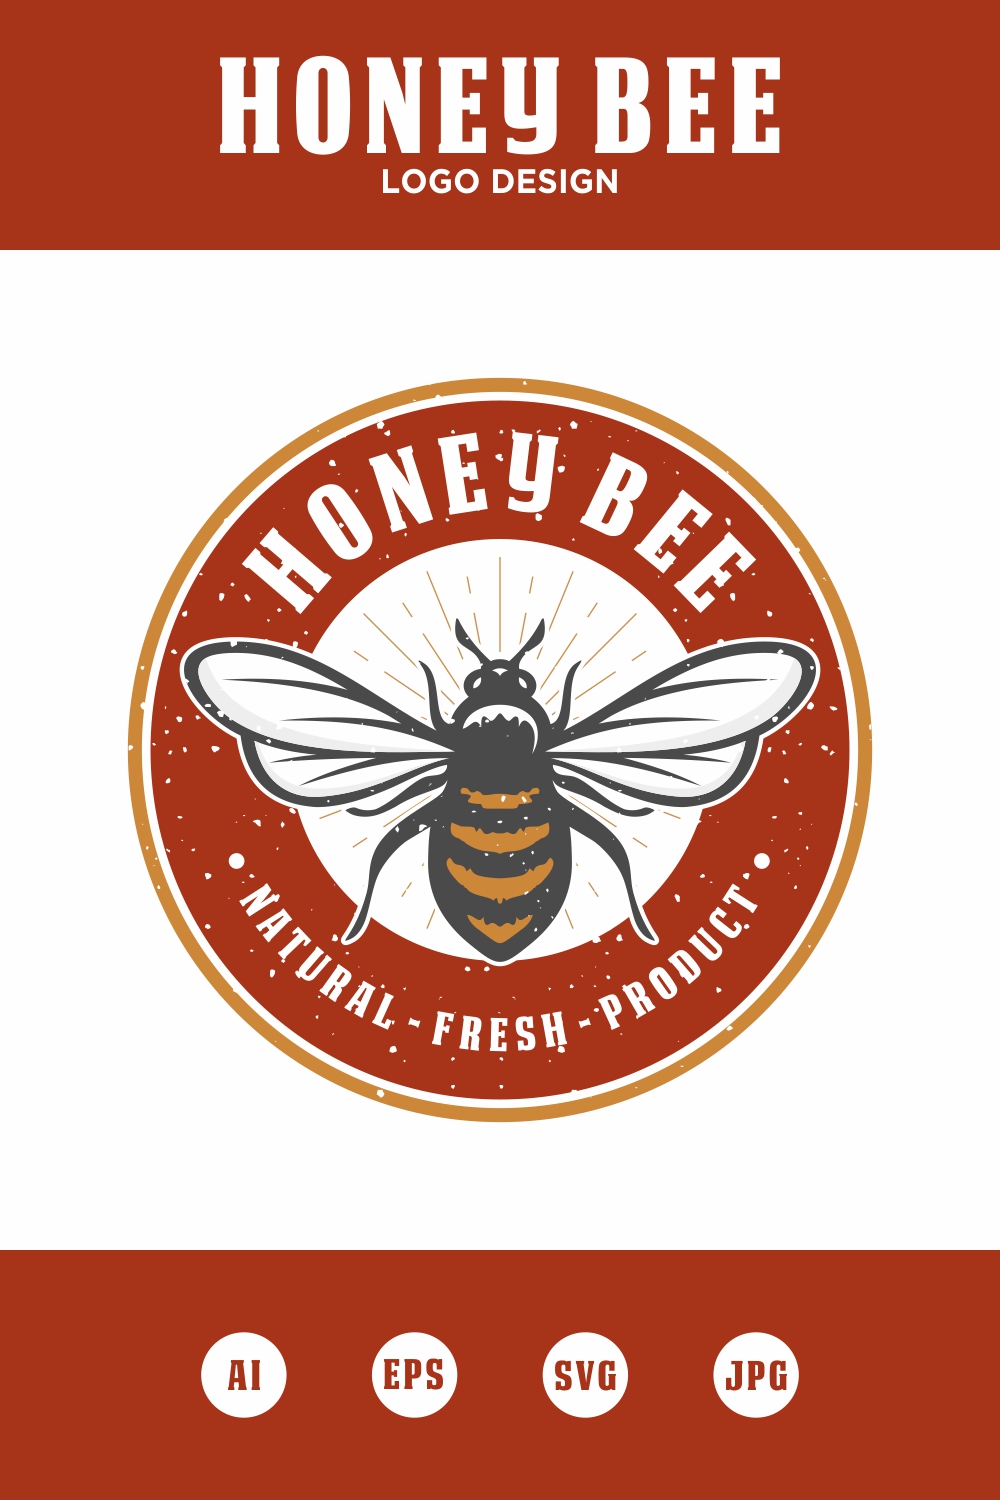 Honey Bee logo design - only 8$ pinterest preview image.